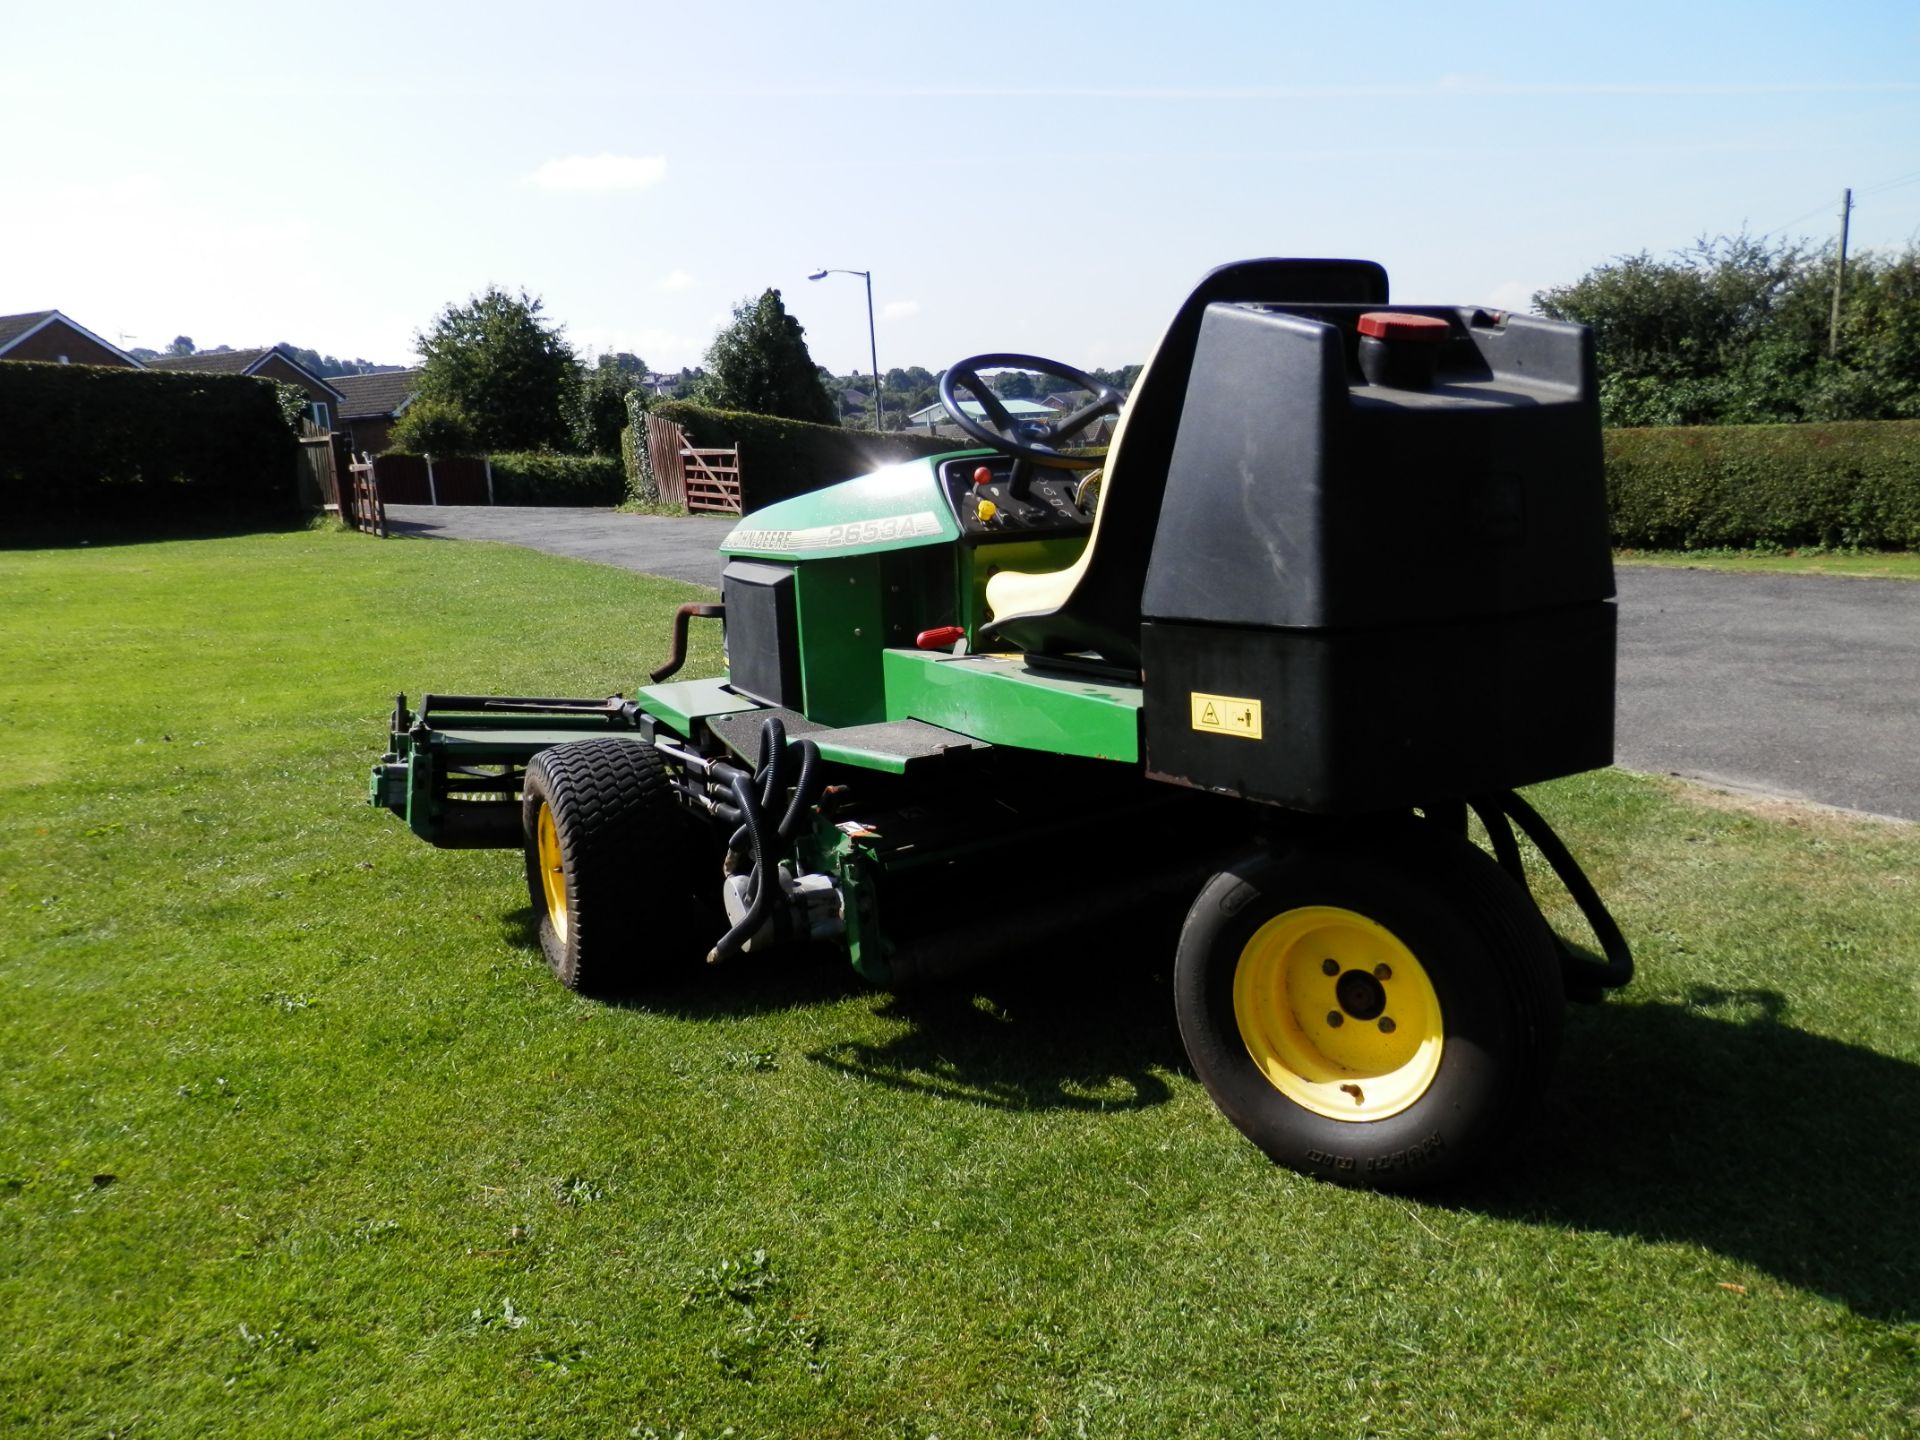 1996 JOHN DEERE 2653A RIDE ON GANG MOWER,CHECKED & WORKING. WIDE CUT, IDEAL FOR ESTATES/GOLF COURSES - Image 7 of 11